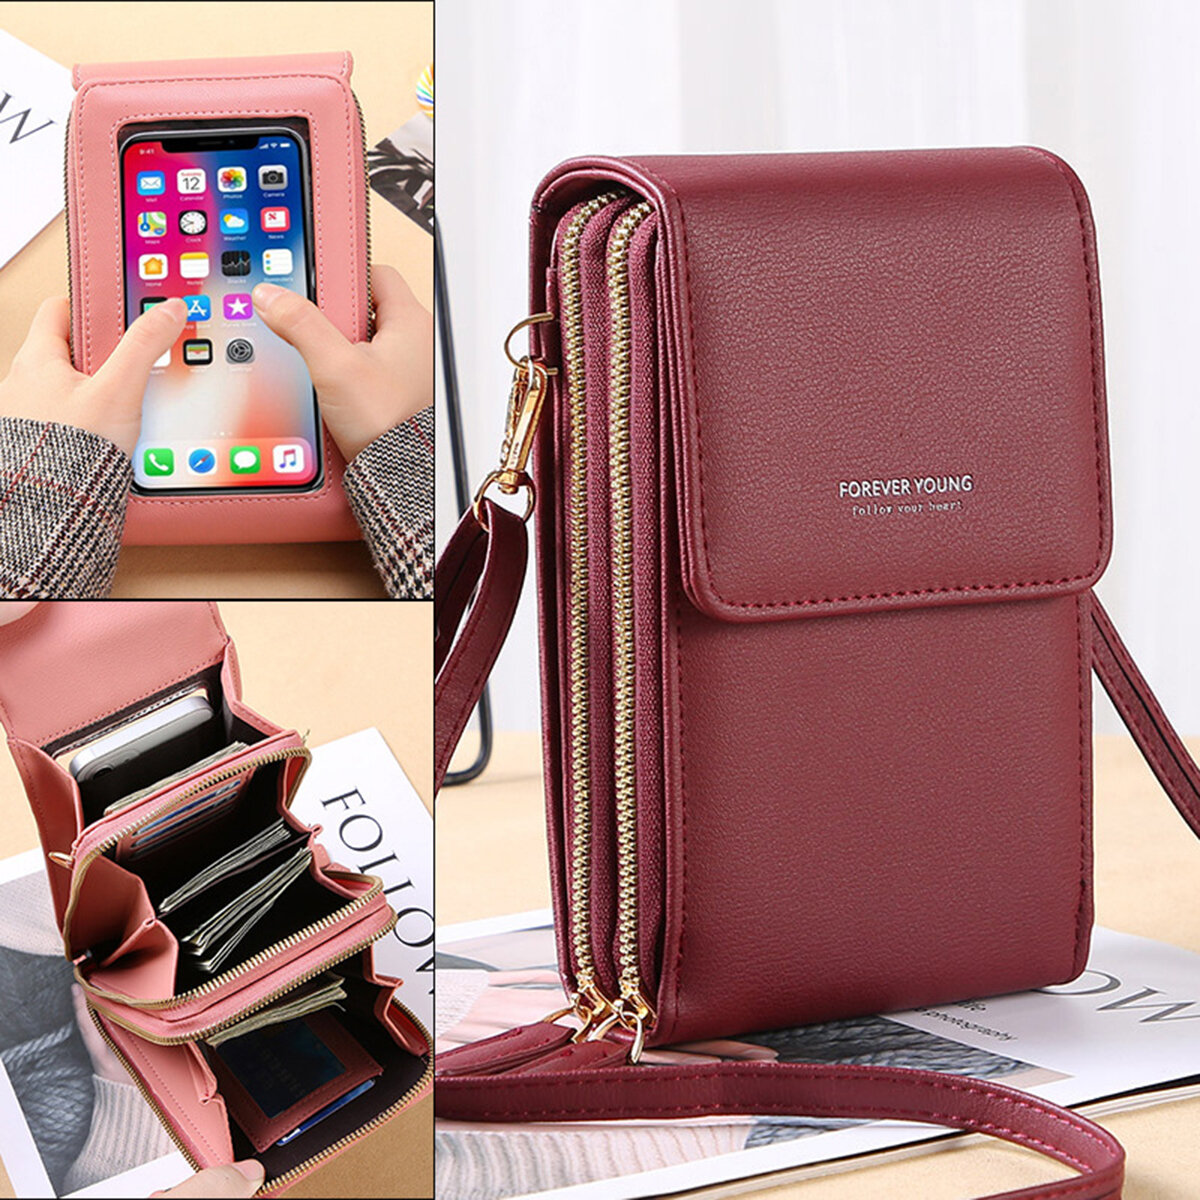 Fashion RFID Large Capacity with Multi-Card Slot Wallet PU Leather Touch Screen Mobile Phone Bag Cro